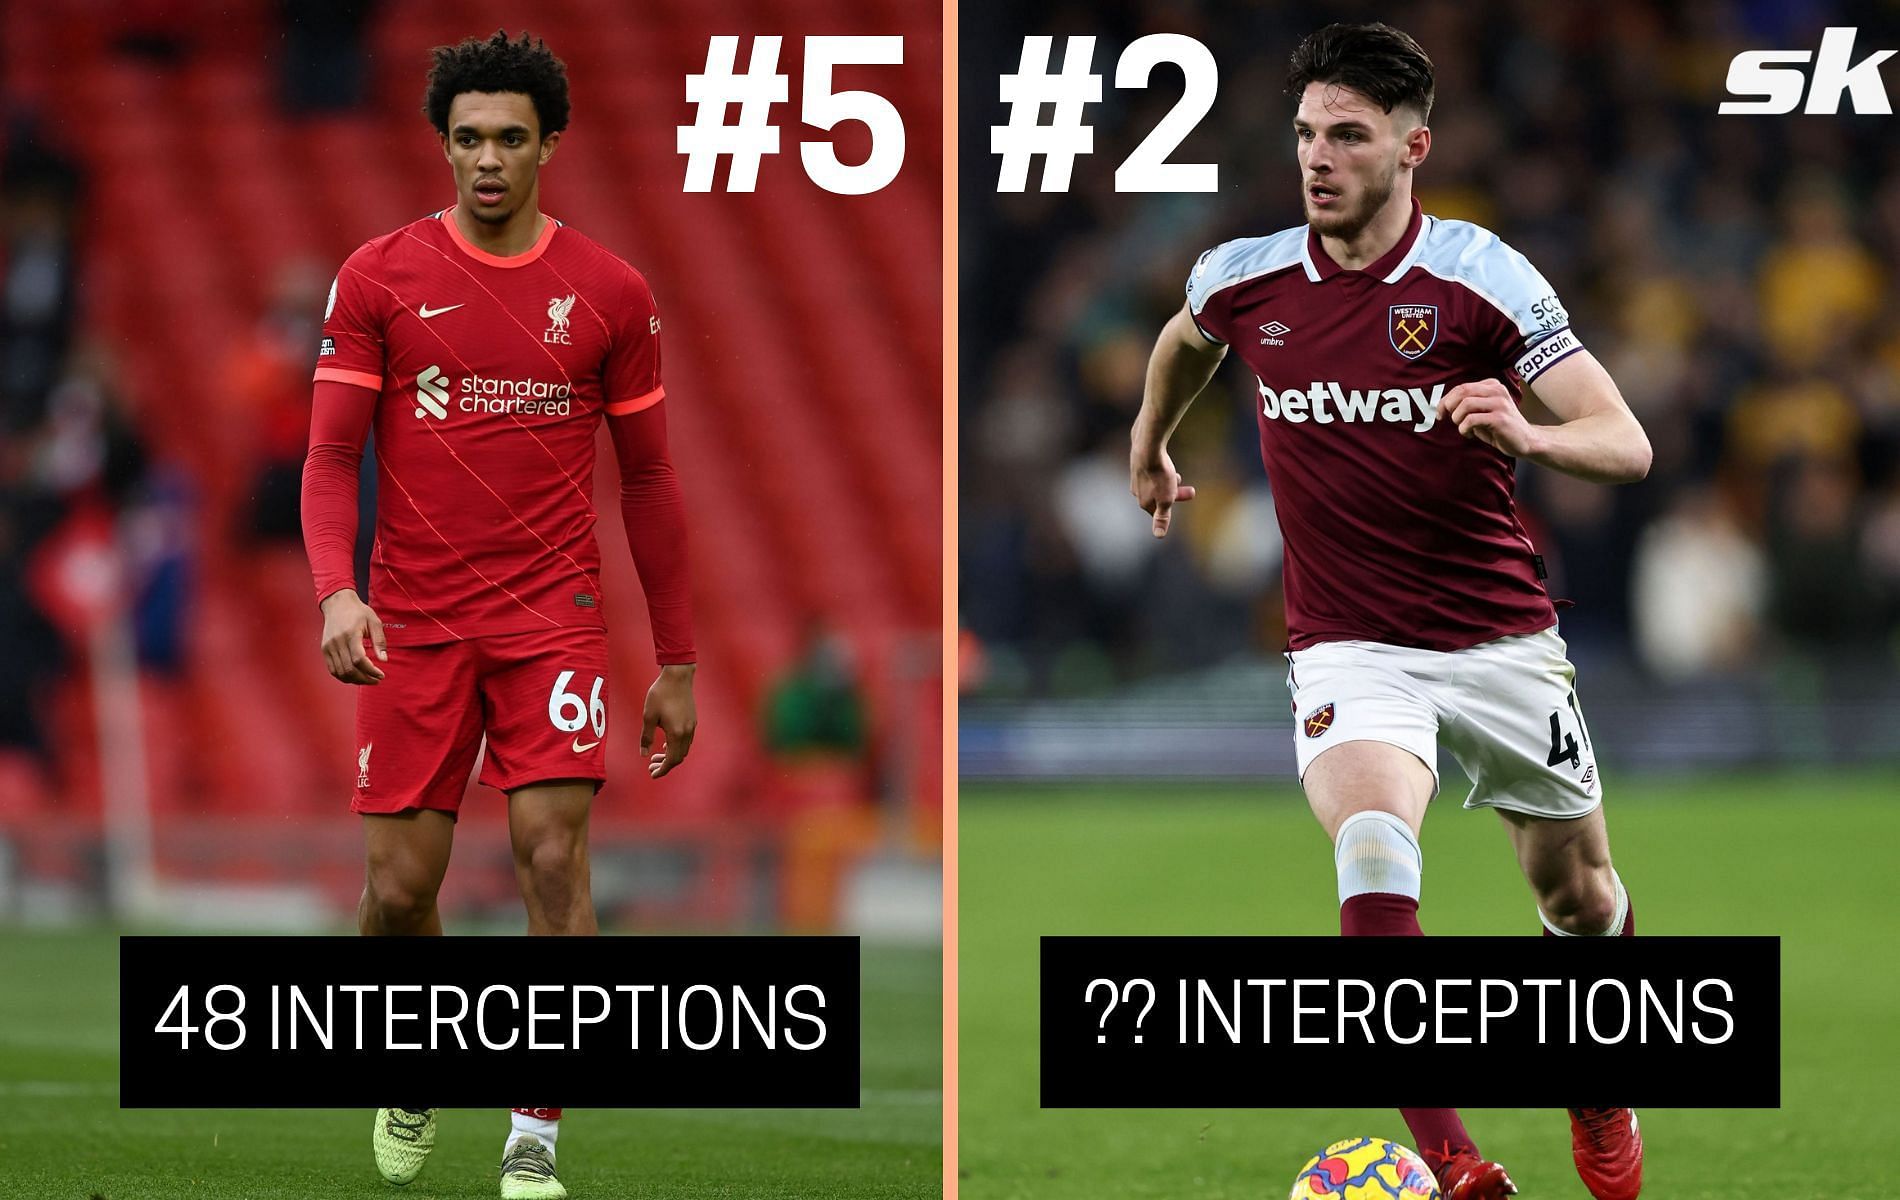 The Premier League has seen a number of interceptions this season